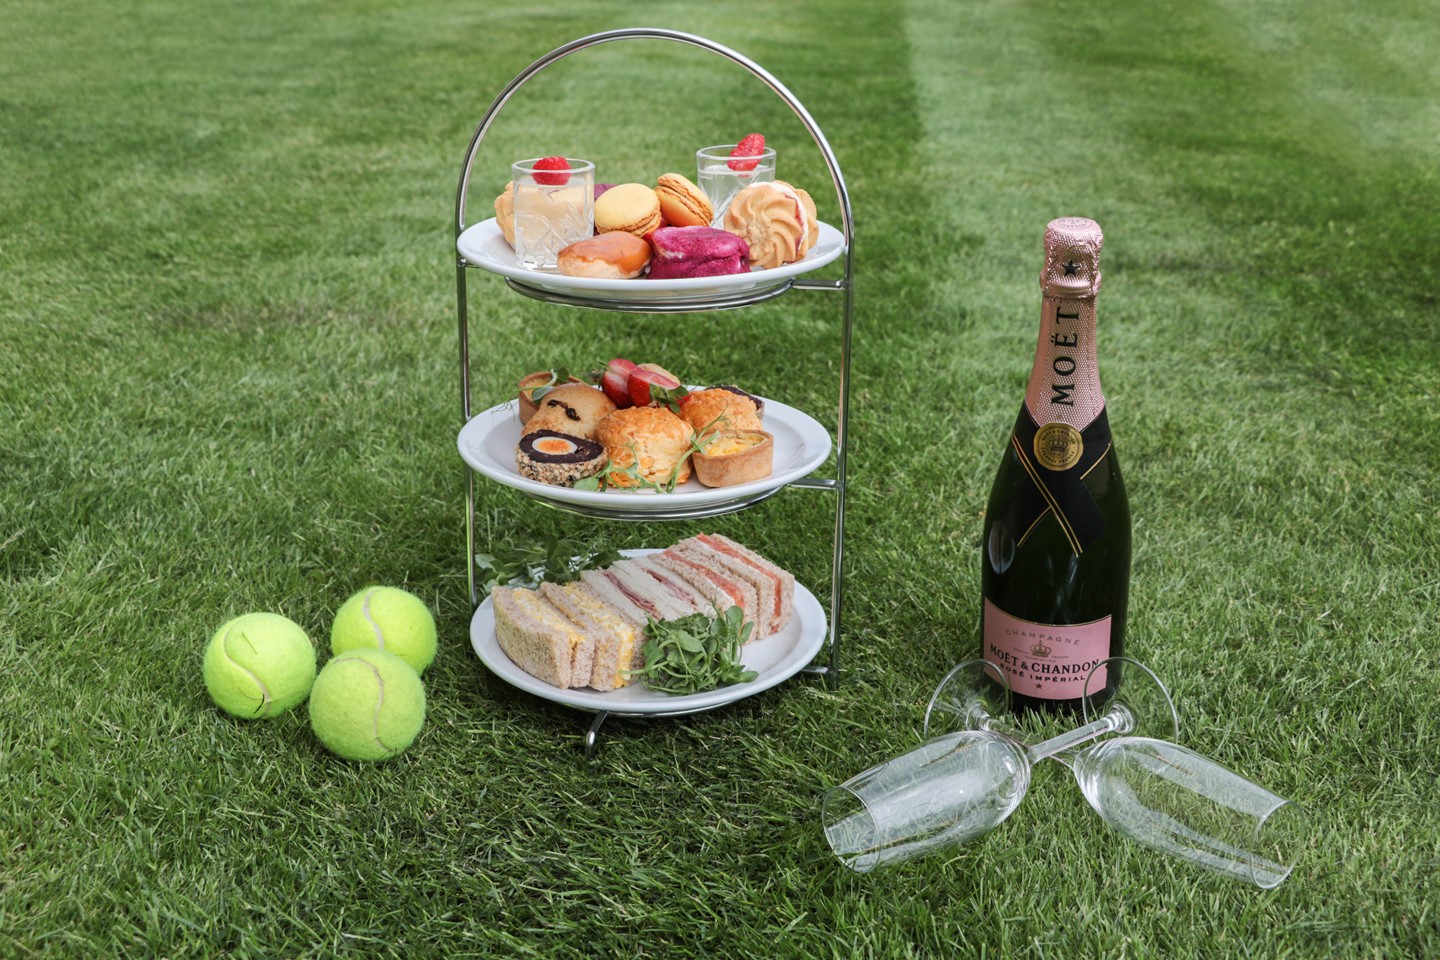 Afternoon Tea cake stand on the grass with tennis balls